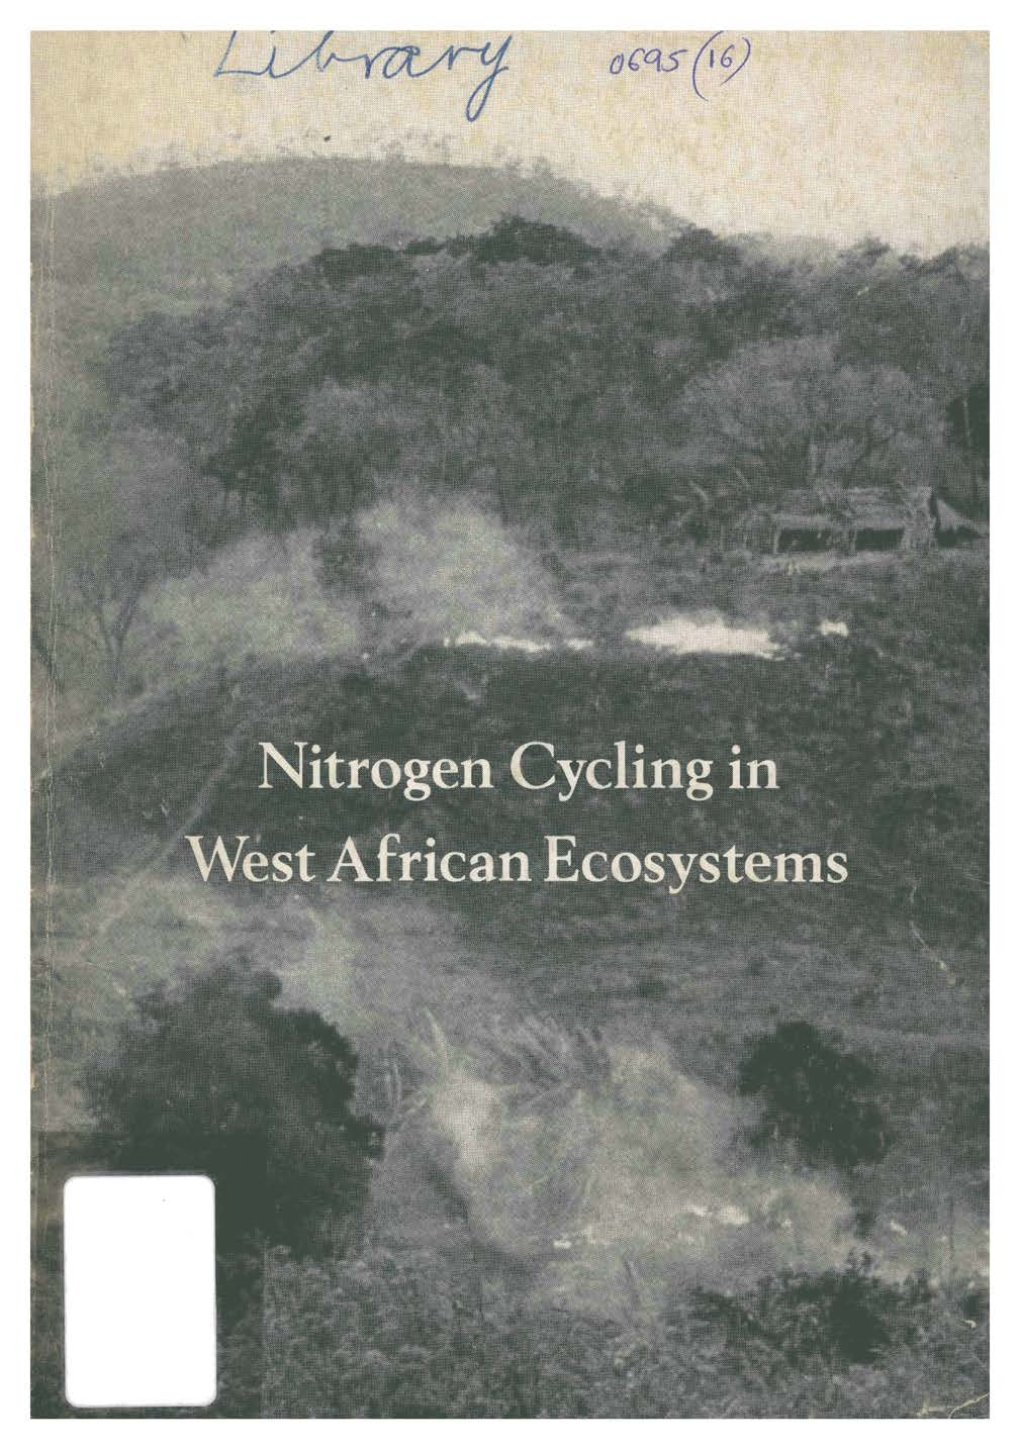 Scope AM Nitrogen Cycling in West African Ecosystems